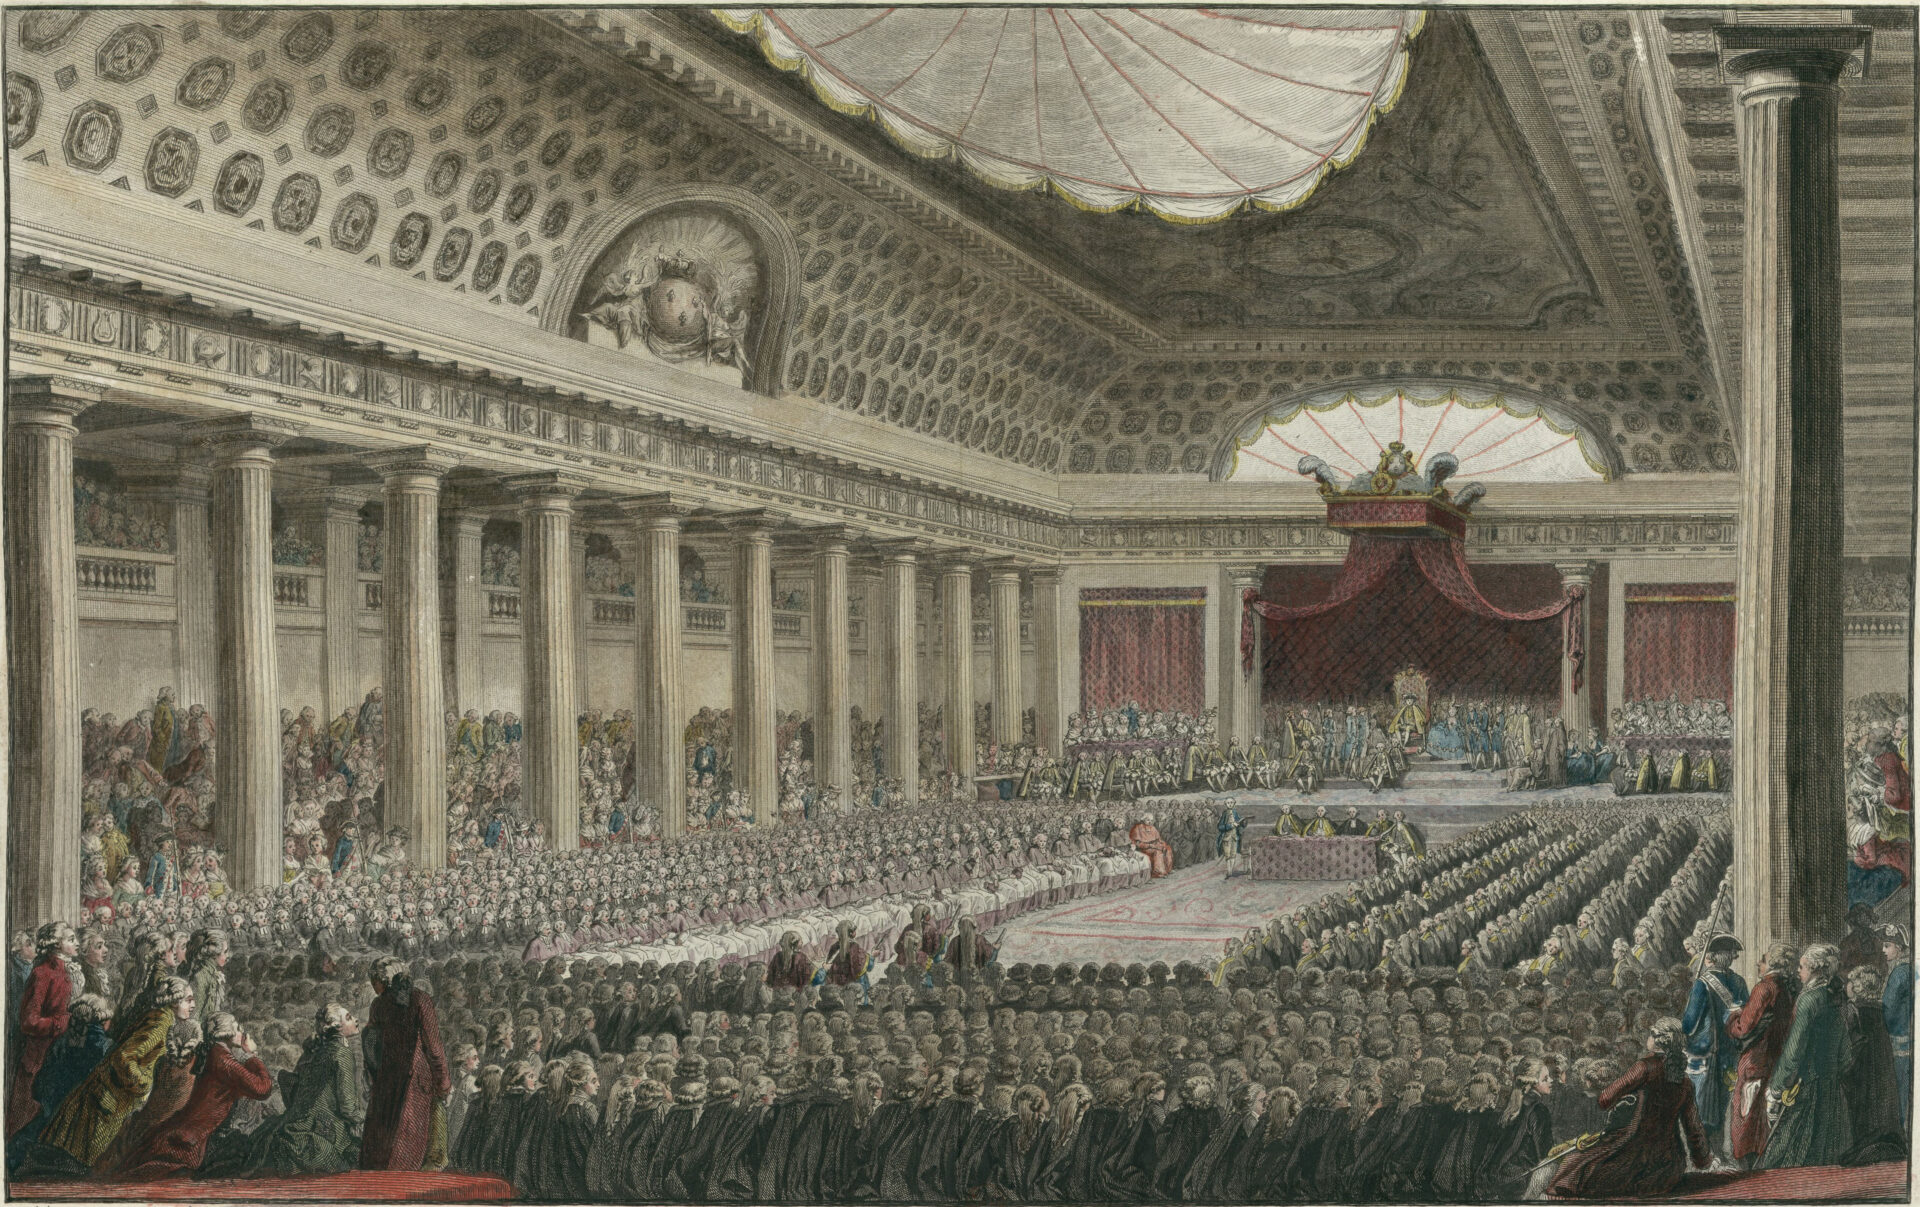 The Estates General | The Rise of the Nation